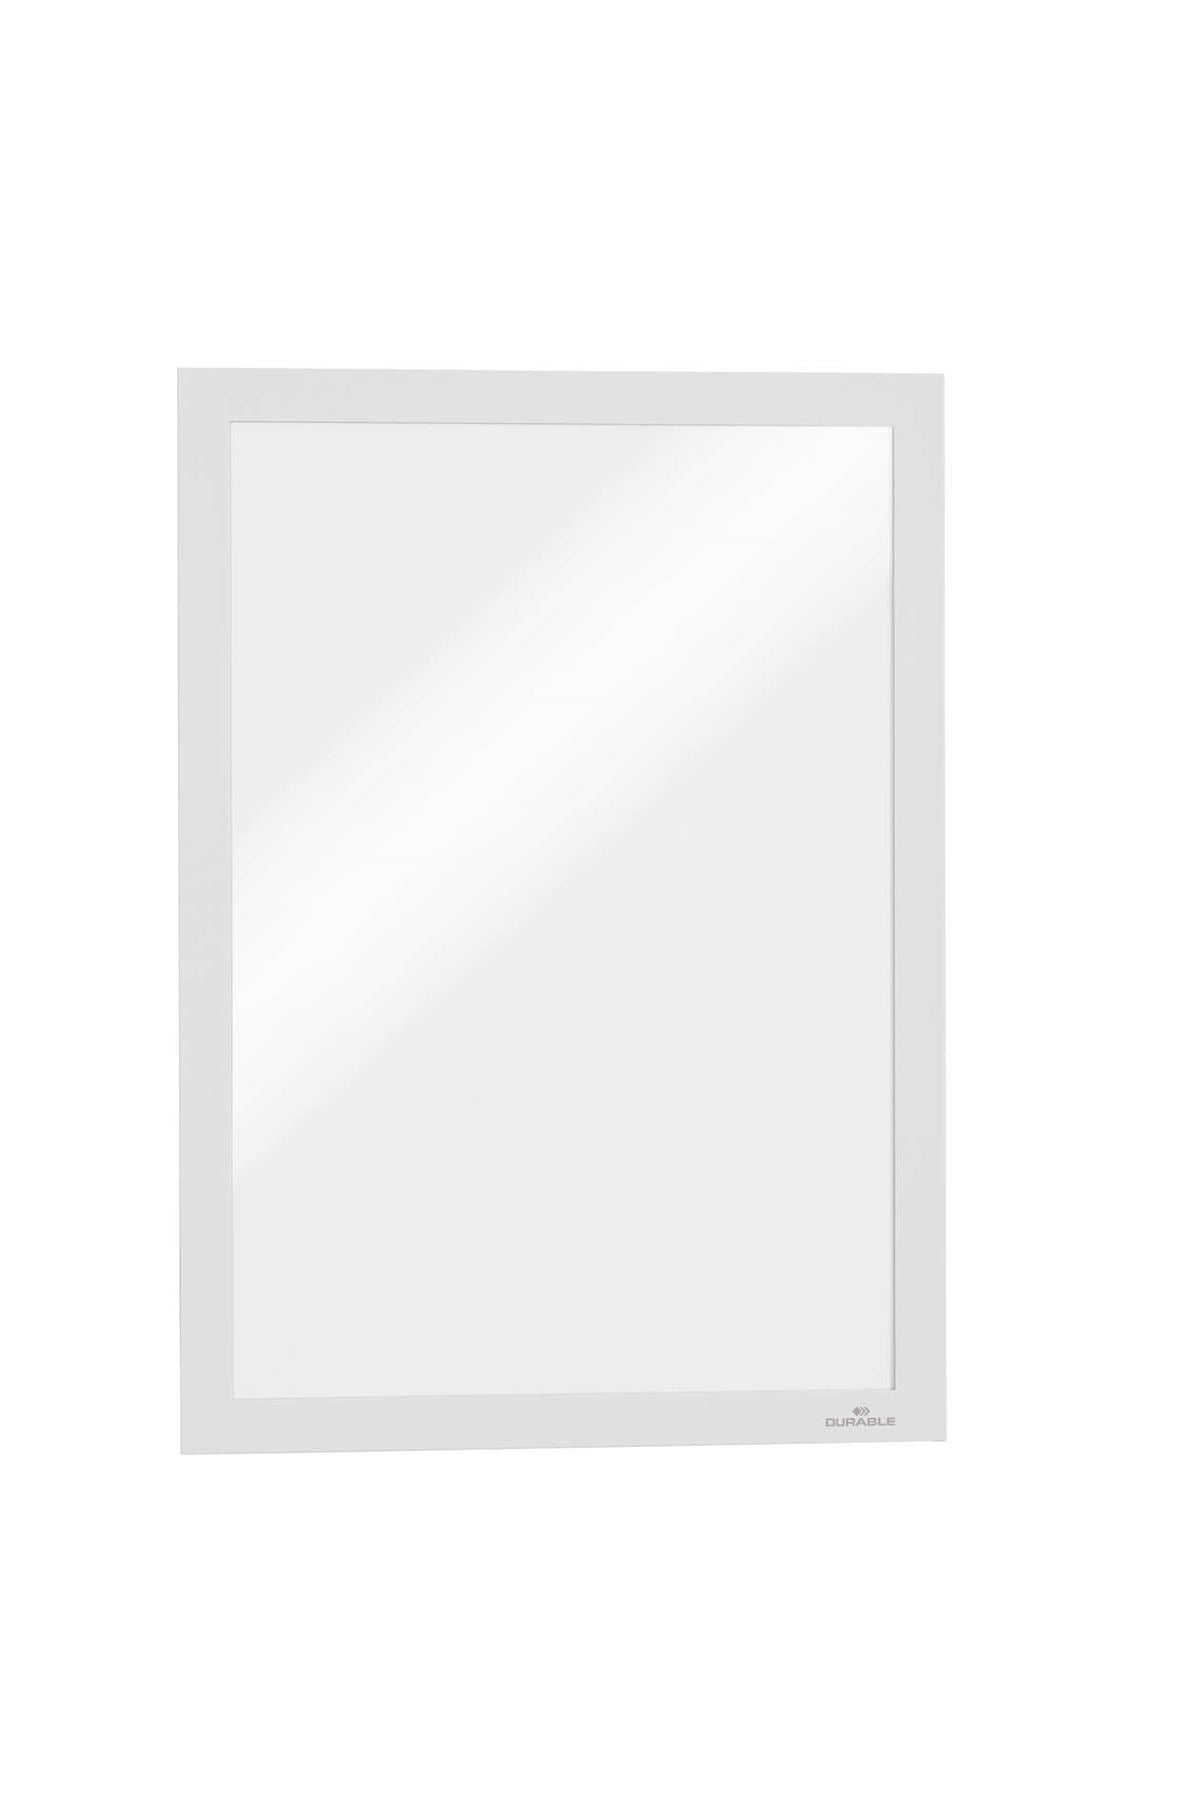 Durable DURAFRAME Self Adhesive Magnetic Signage Frame | 10 Pack | A4 White